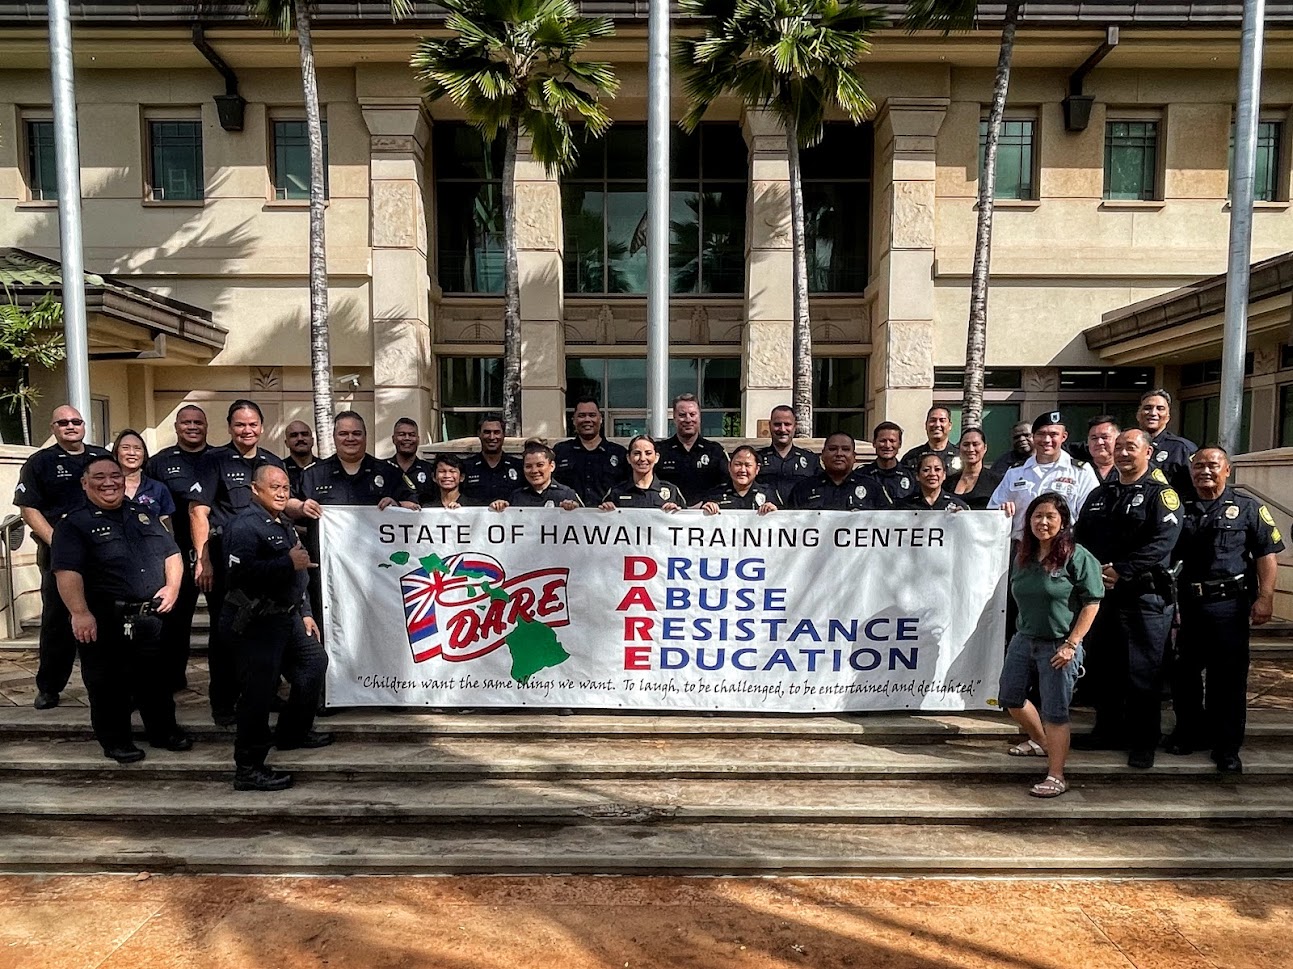 Class Photo from the D.A.R.E. Officer Training held on July 11 – 22, 2022 in Kapolei, HI